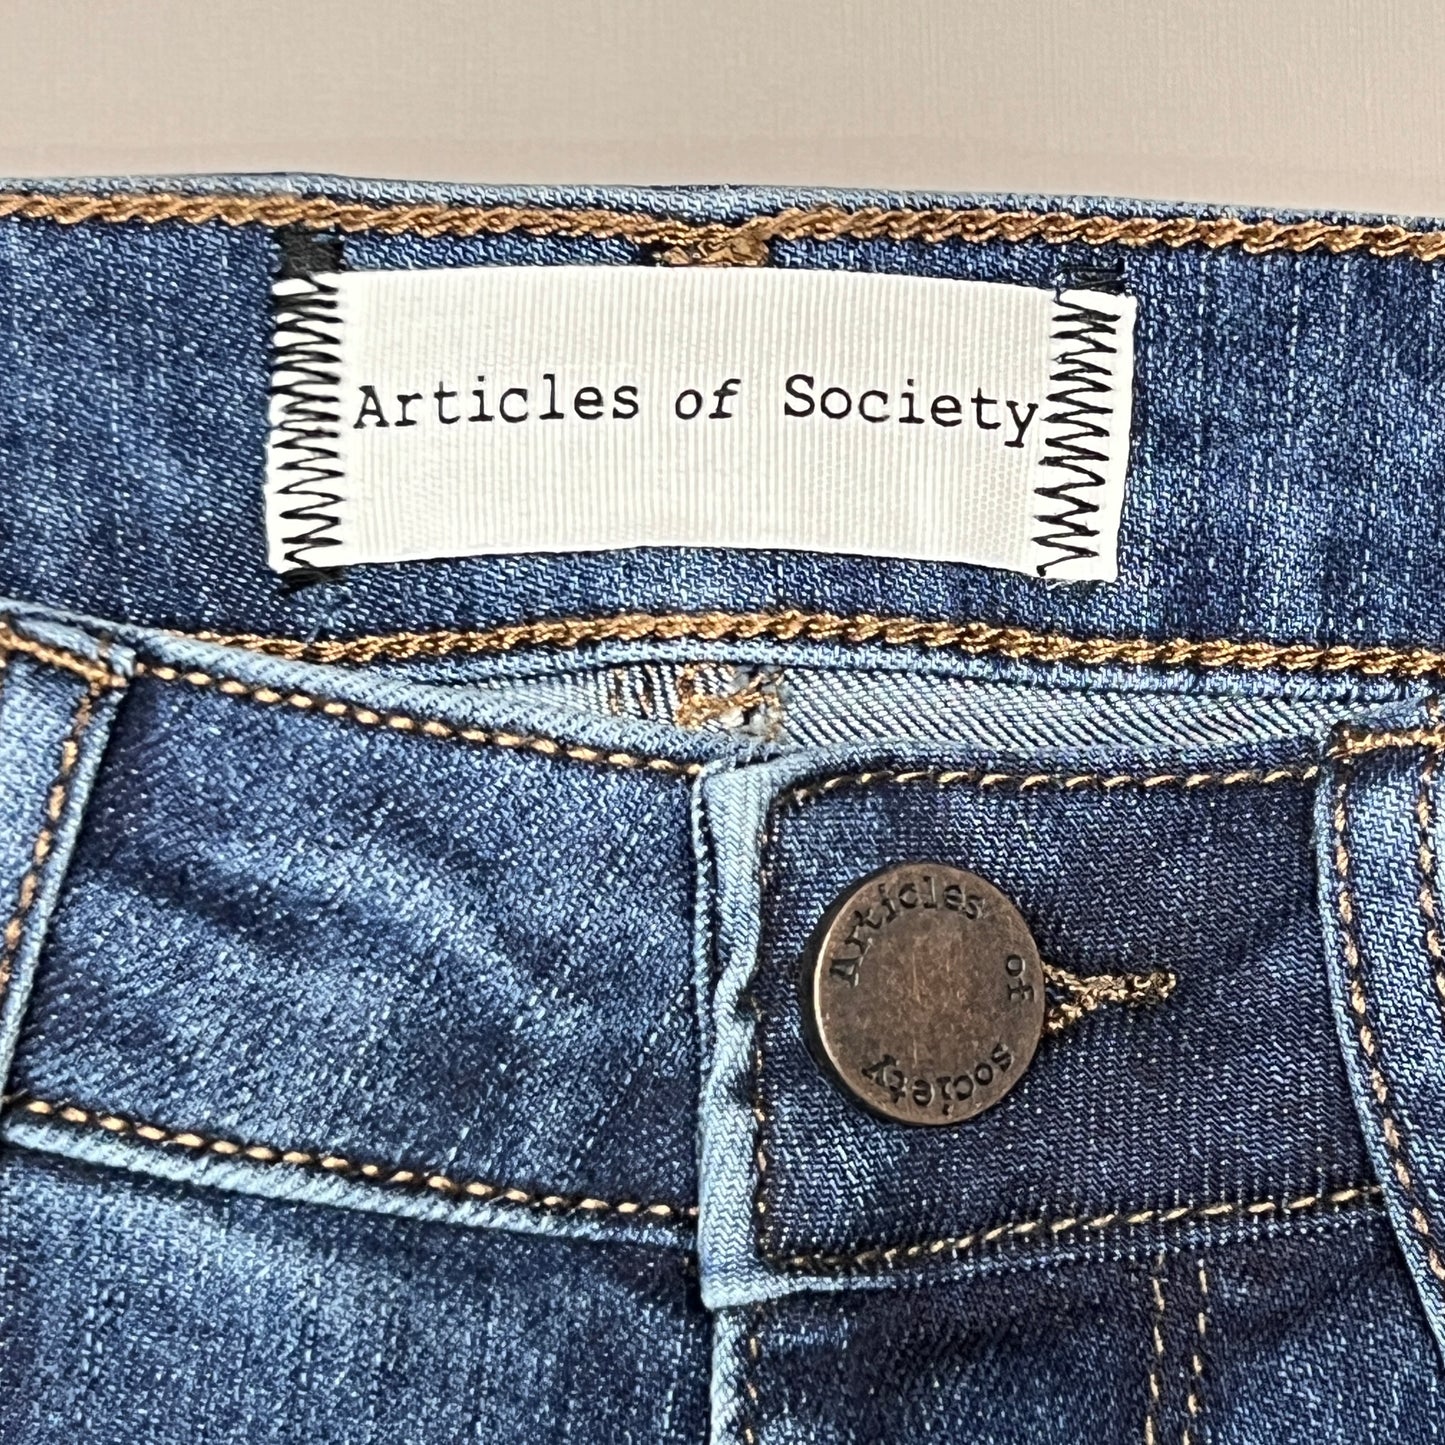 ARTICLES OF SOCIETY Hilo Ripped Denim Jeans Women's Sz 27 Blue 5350PLV-706 (New)